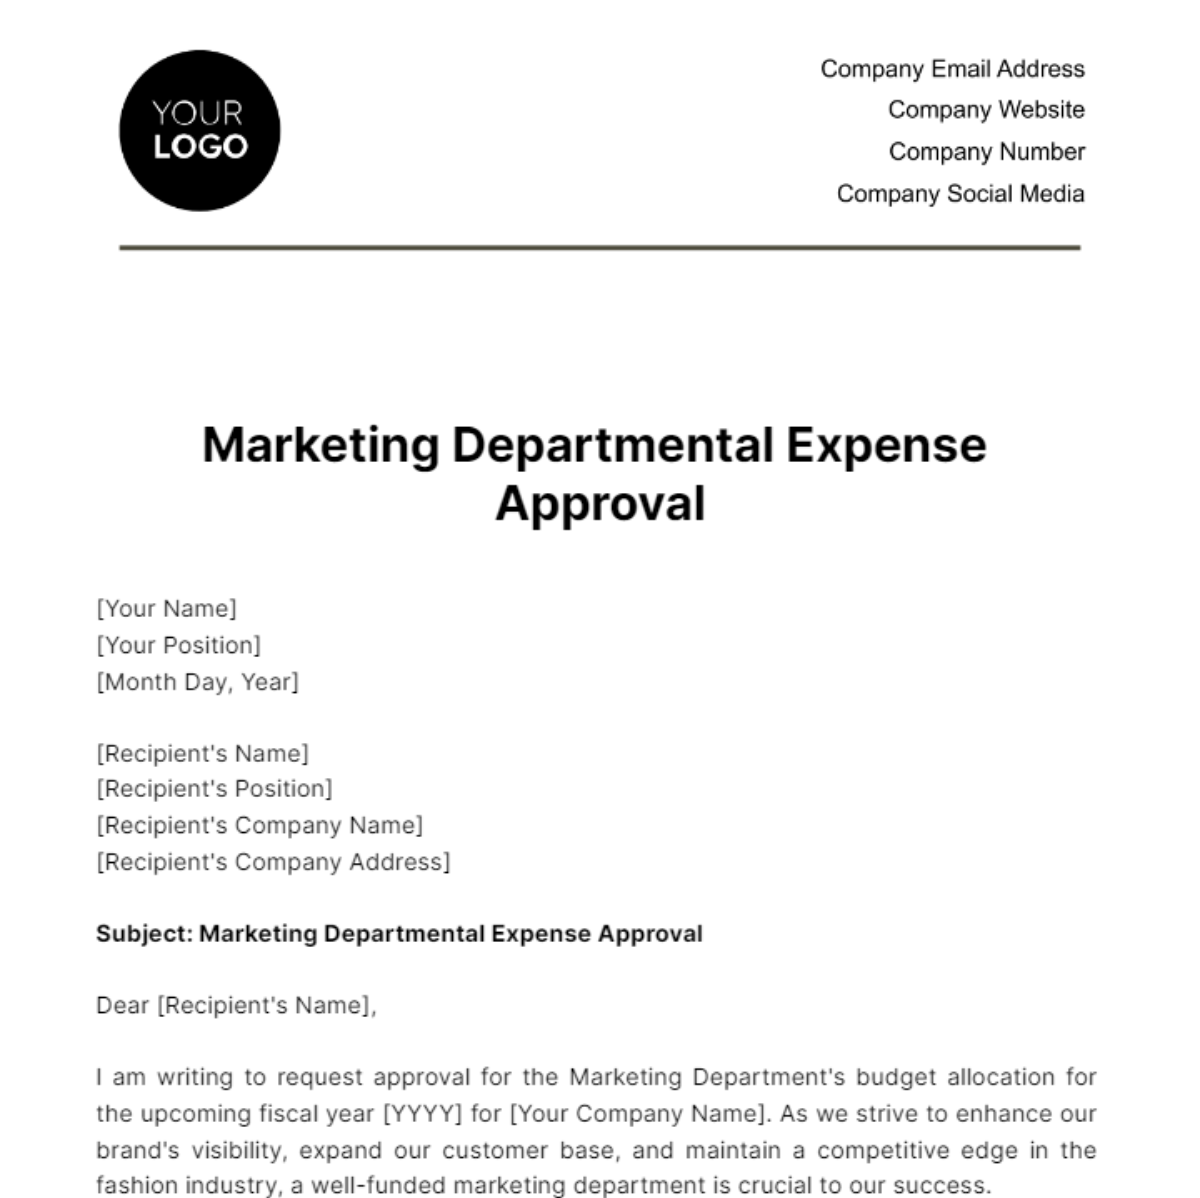 Free Marketing Departmental Expense Approval Template